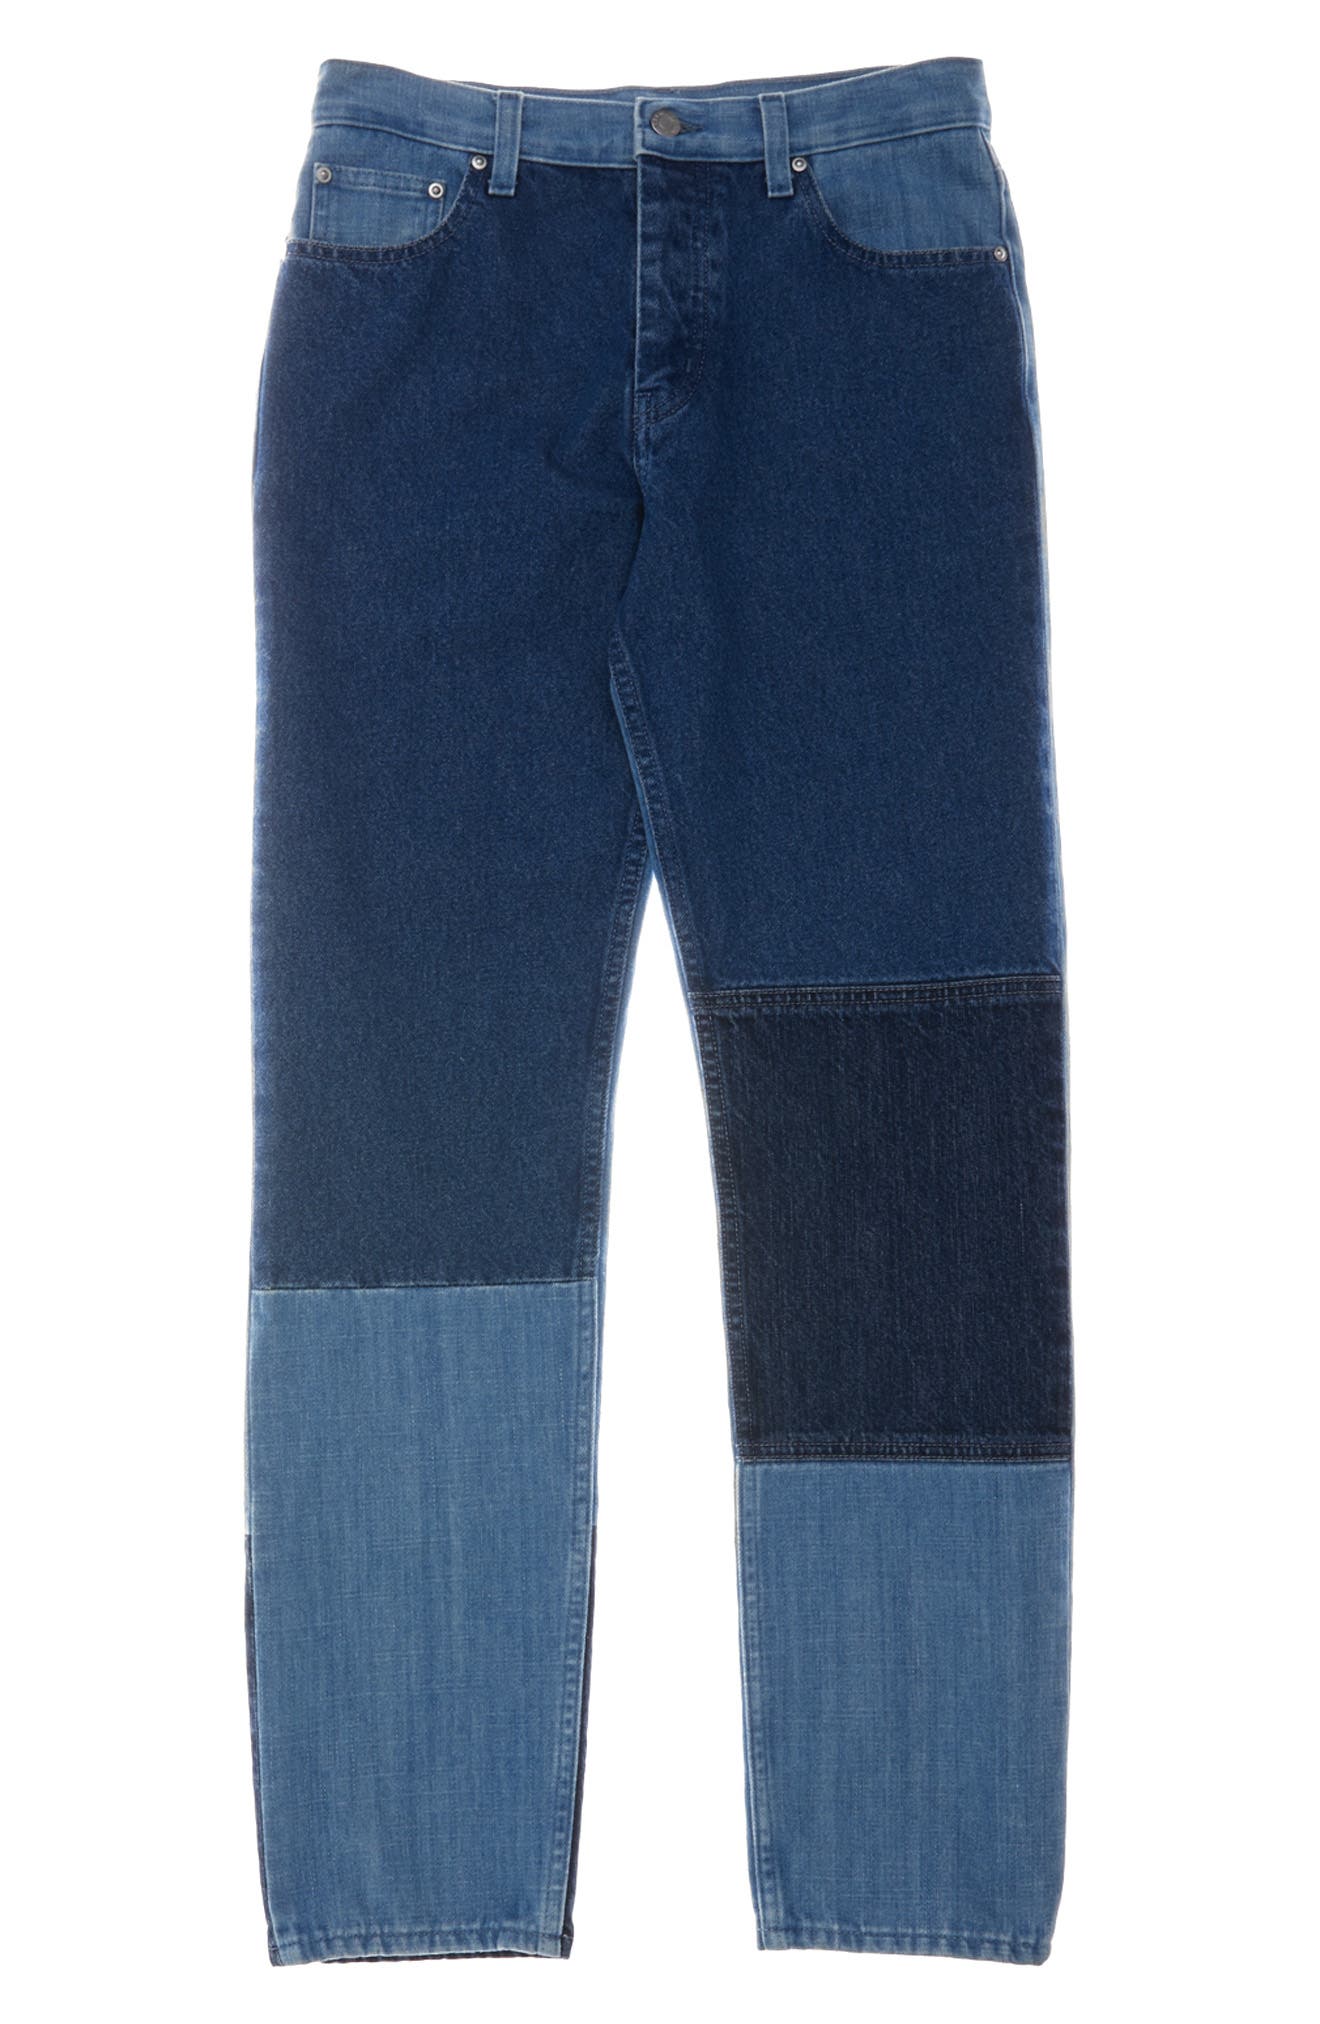 Helmut Lang Pieced Straight-Leg Jeans in Indigo at Nordstrom